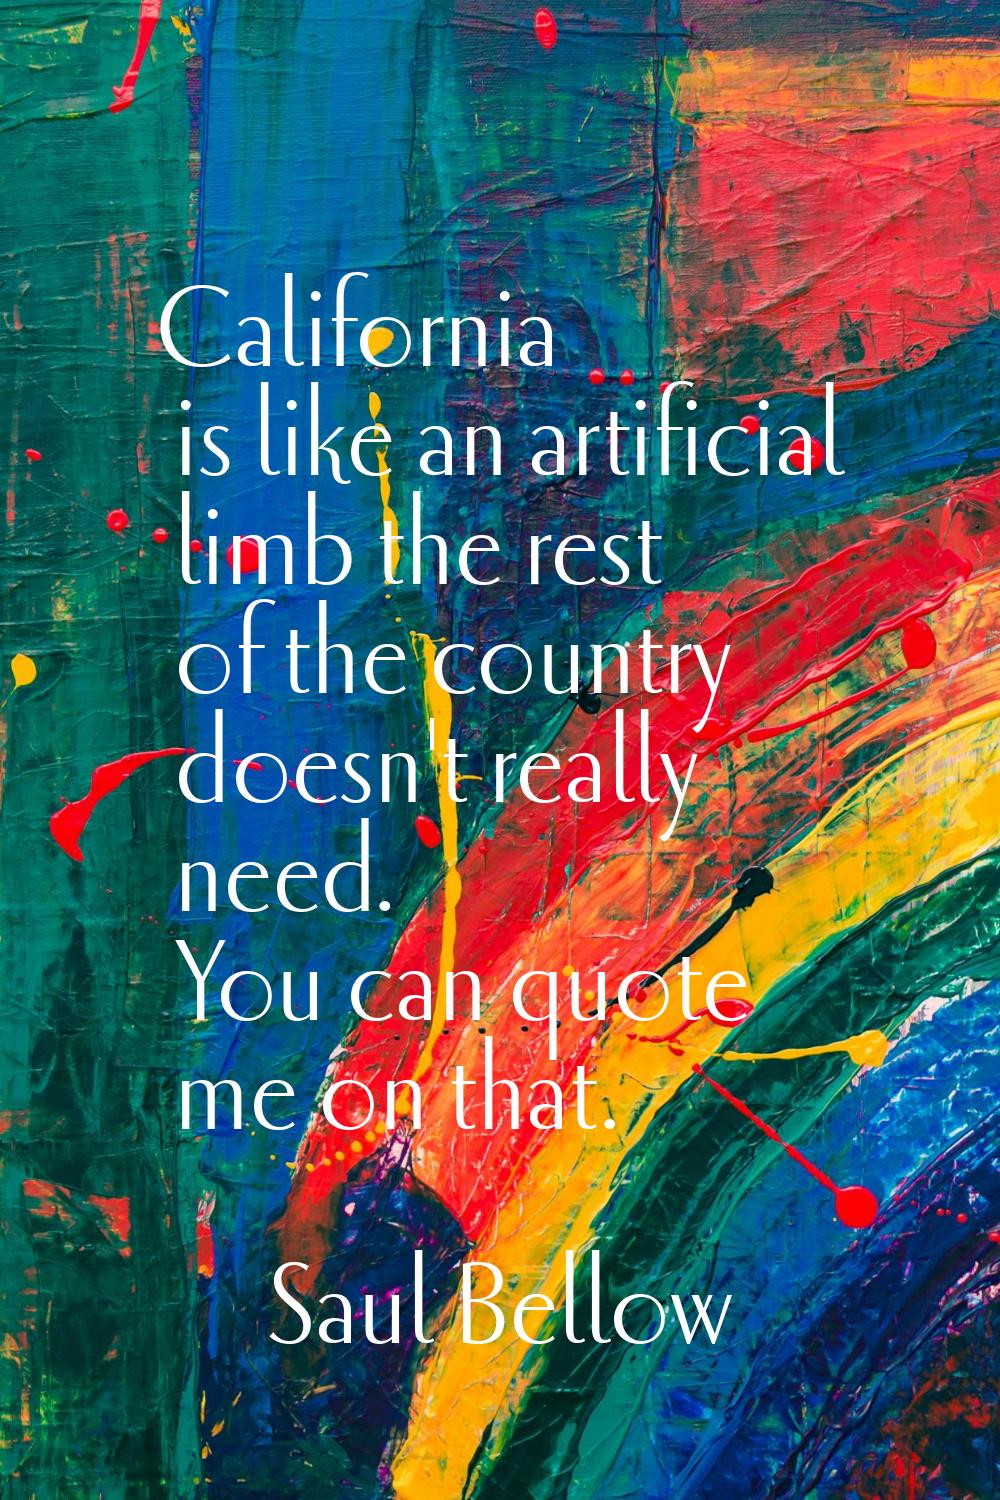 California is like an artificial limb the rest of the country doesn't really need. You can quote me